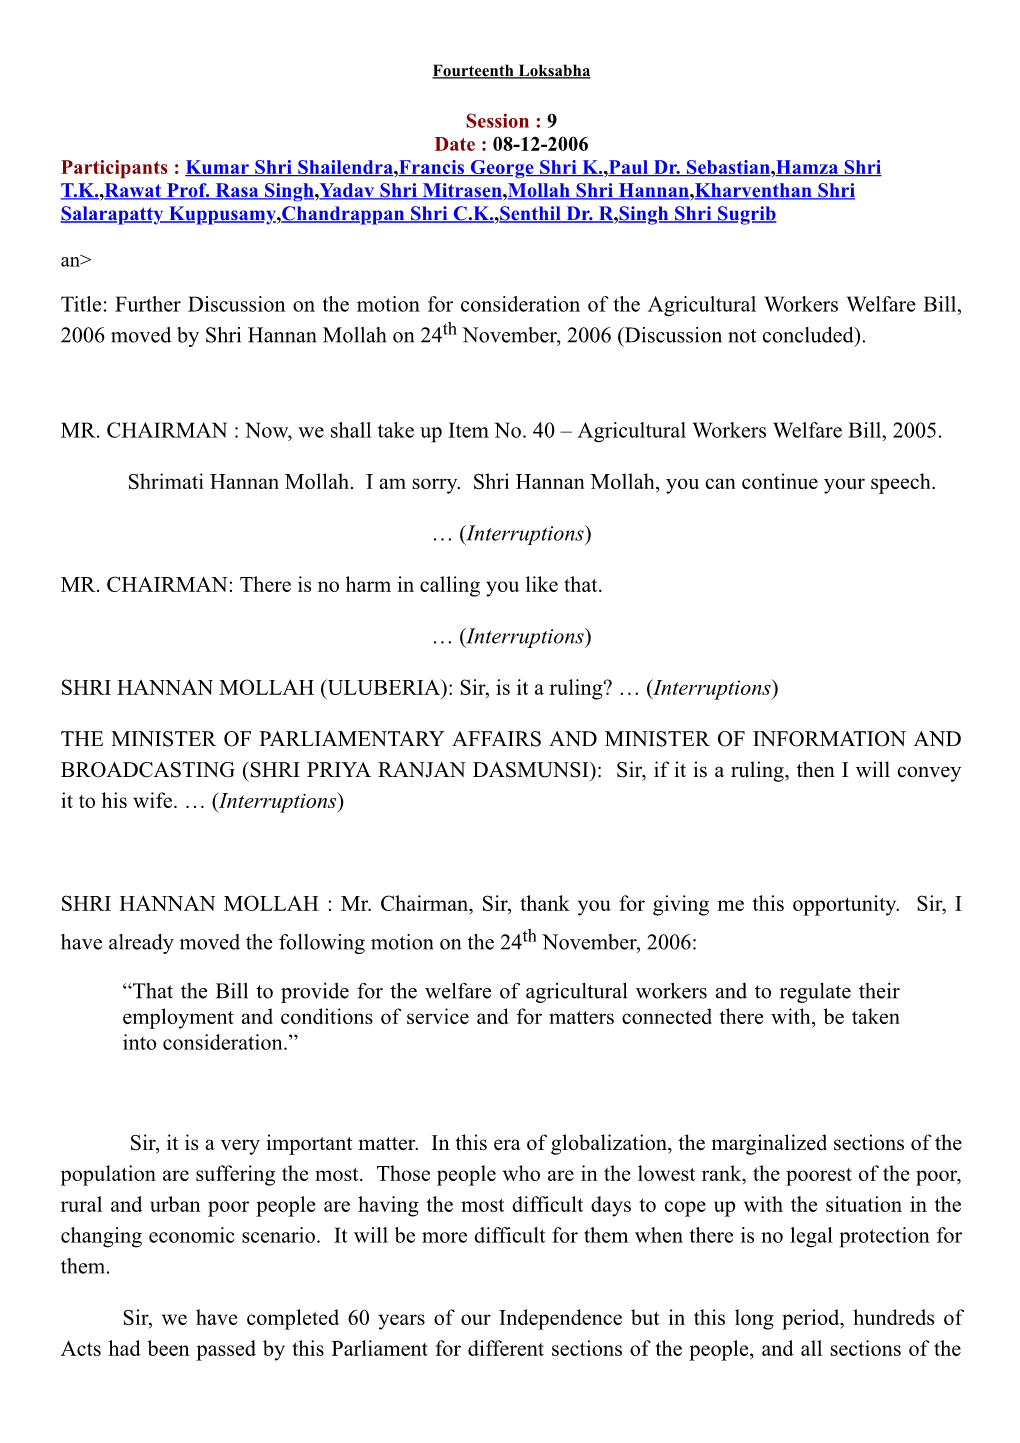 Title: Further Discussion on the Motion for Consideration of the Agricultural Workers Welfare Bill, 2006 Moved by Shri Hannan Mo